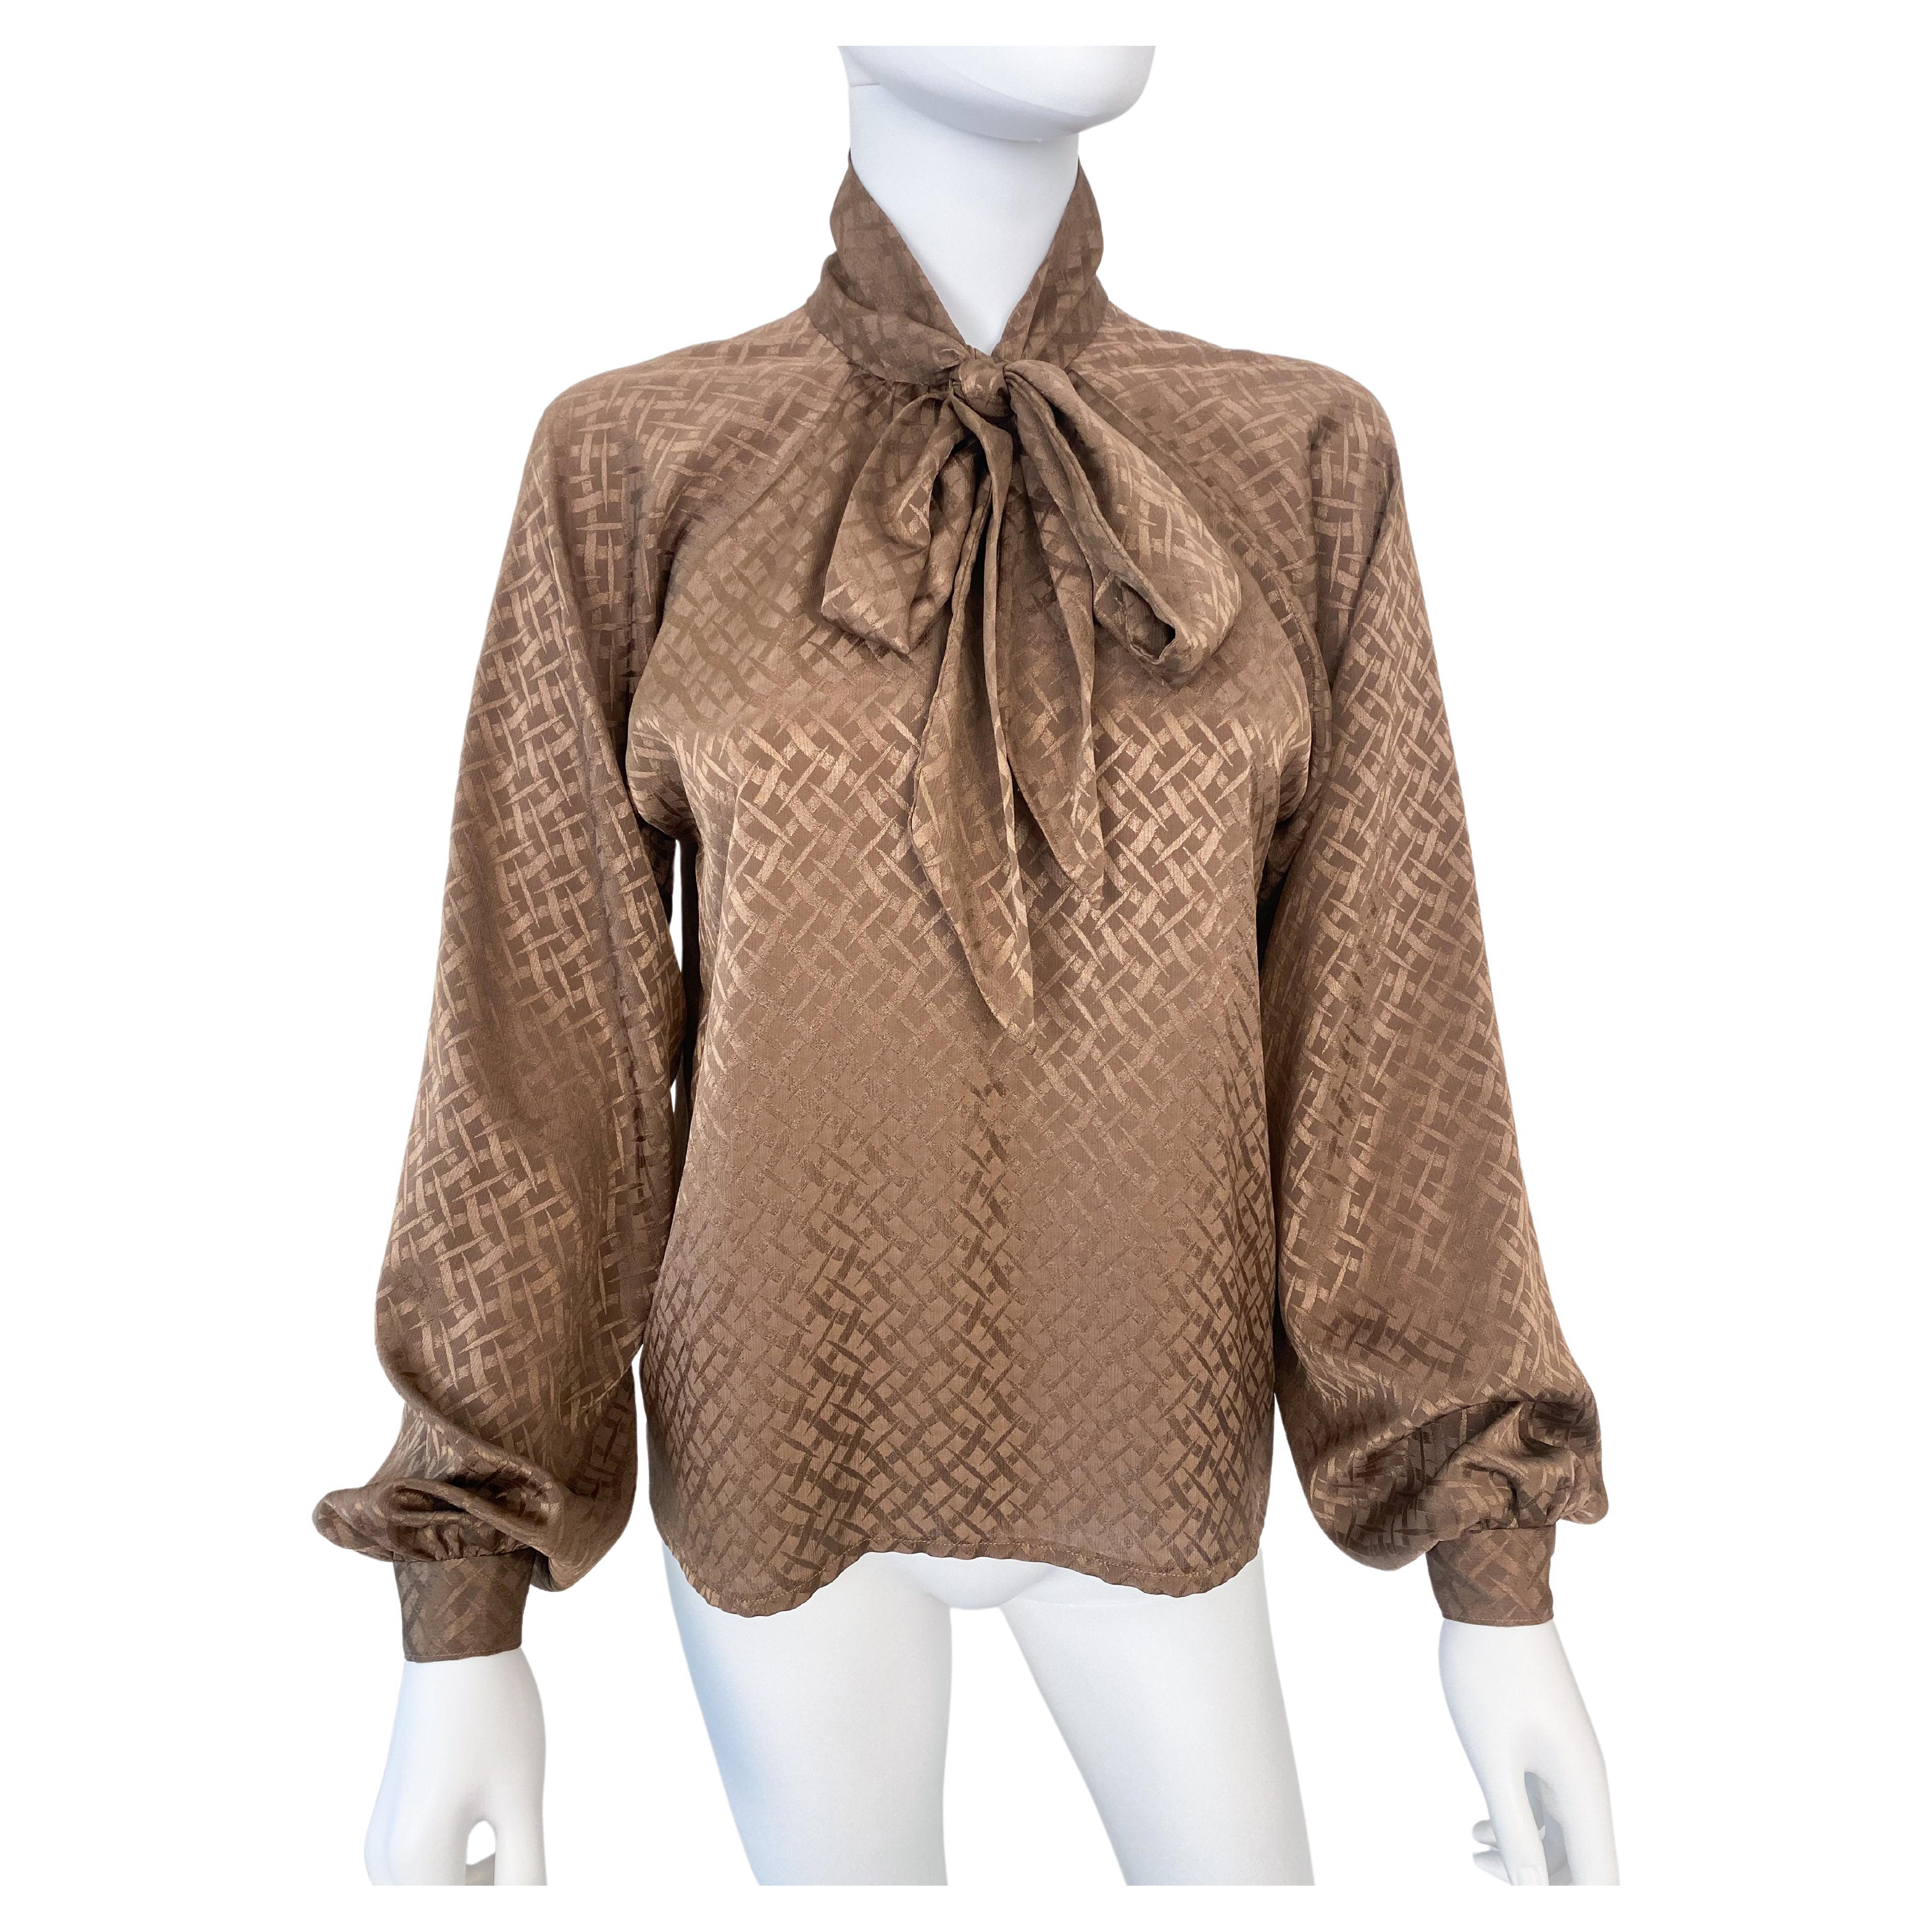 Vintage 1980s Silky Polyester Bow Blouse Top Brown Geometric Print Size 6/8 For Sale